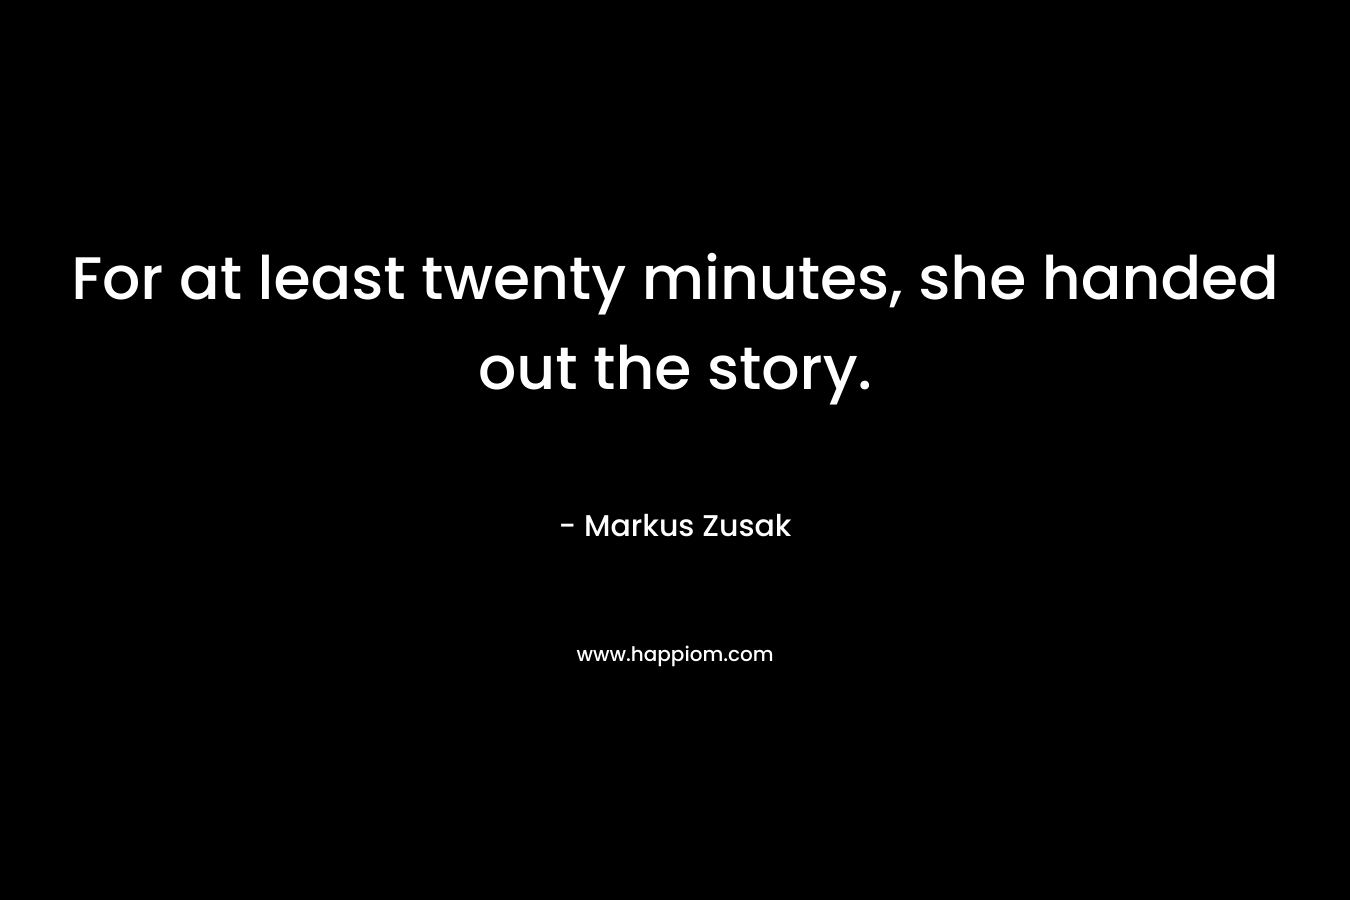 For at least twenty minutes, she handed out the story. – Markus Zusak